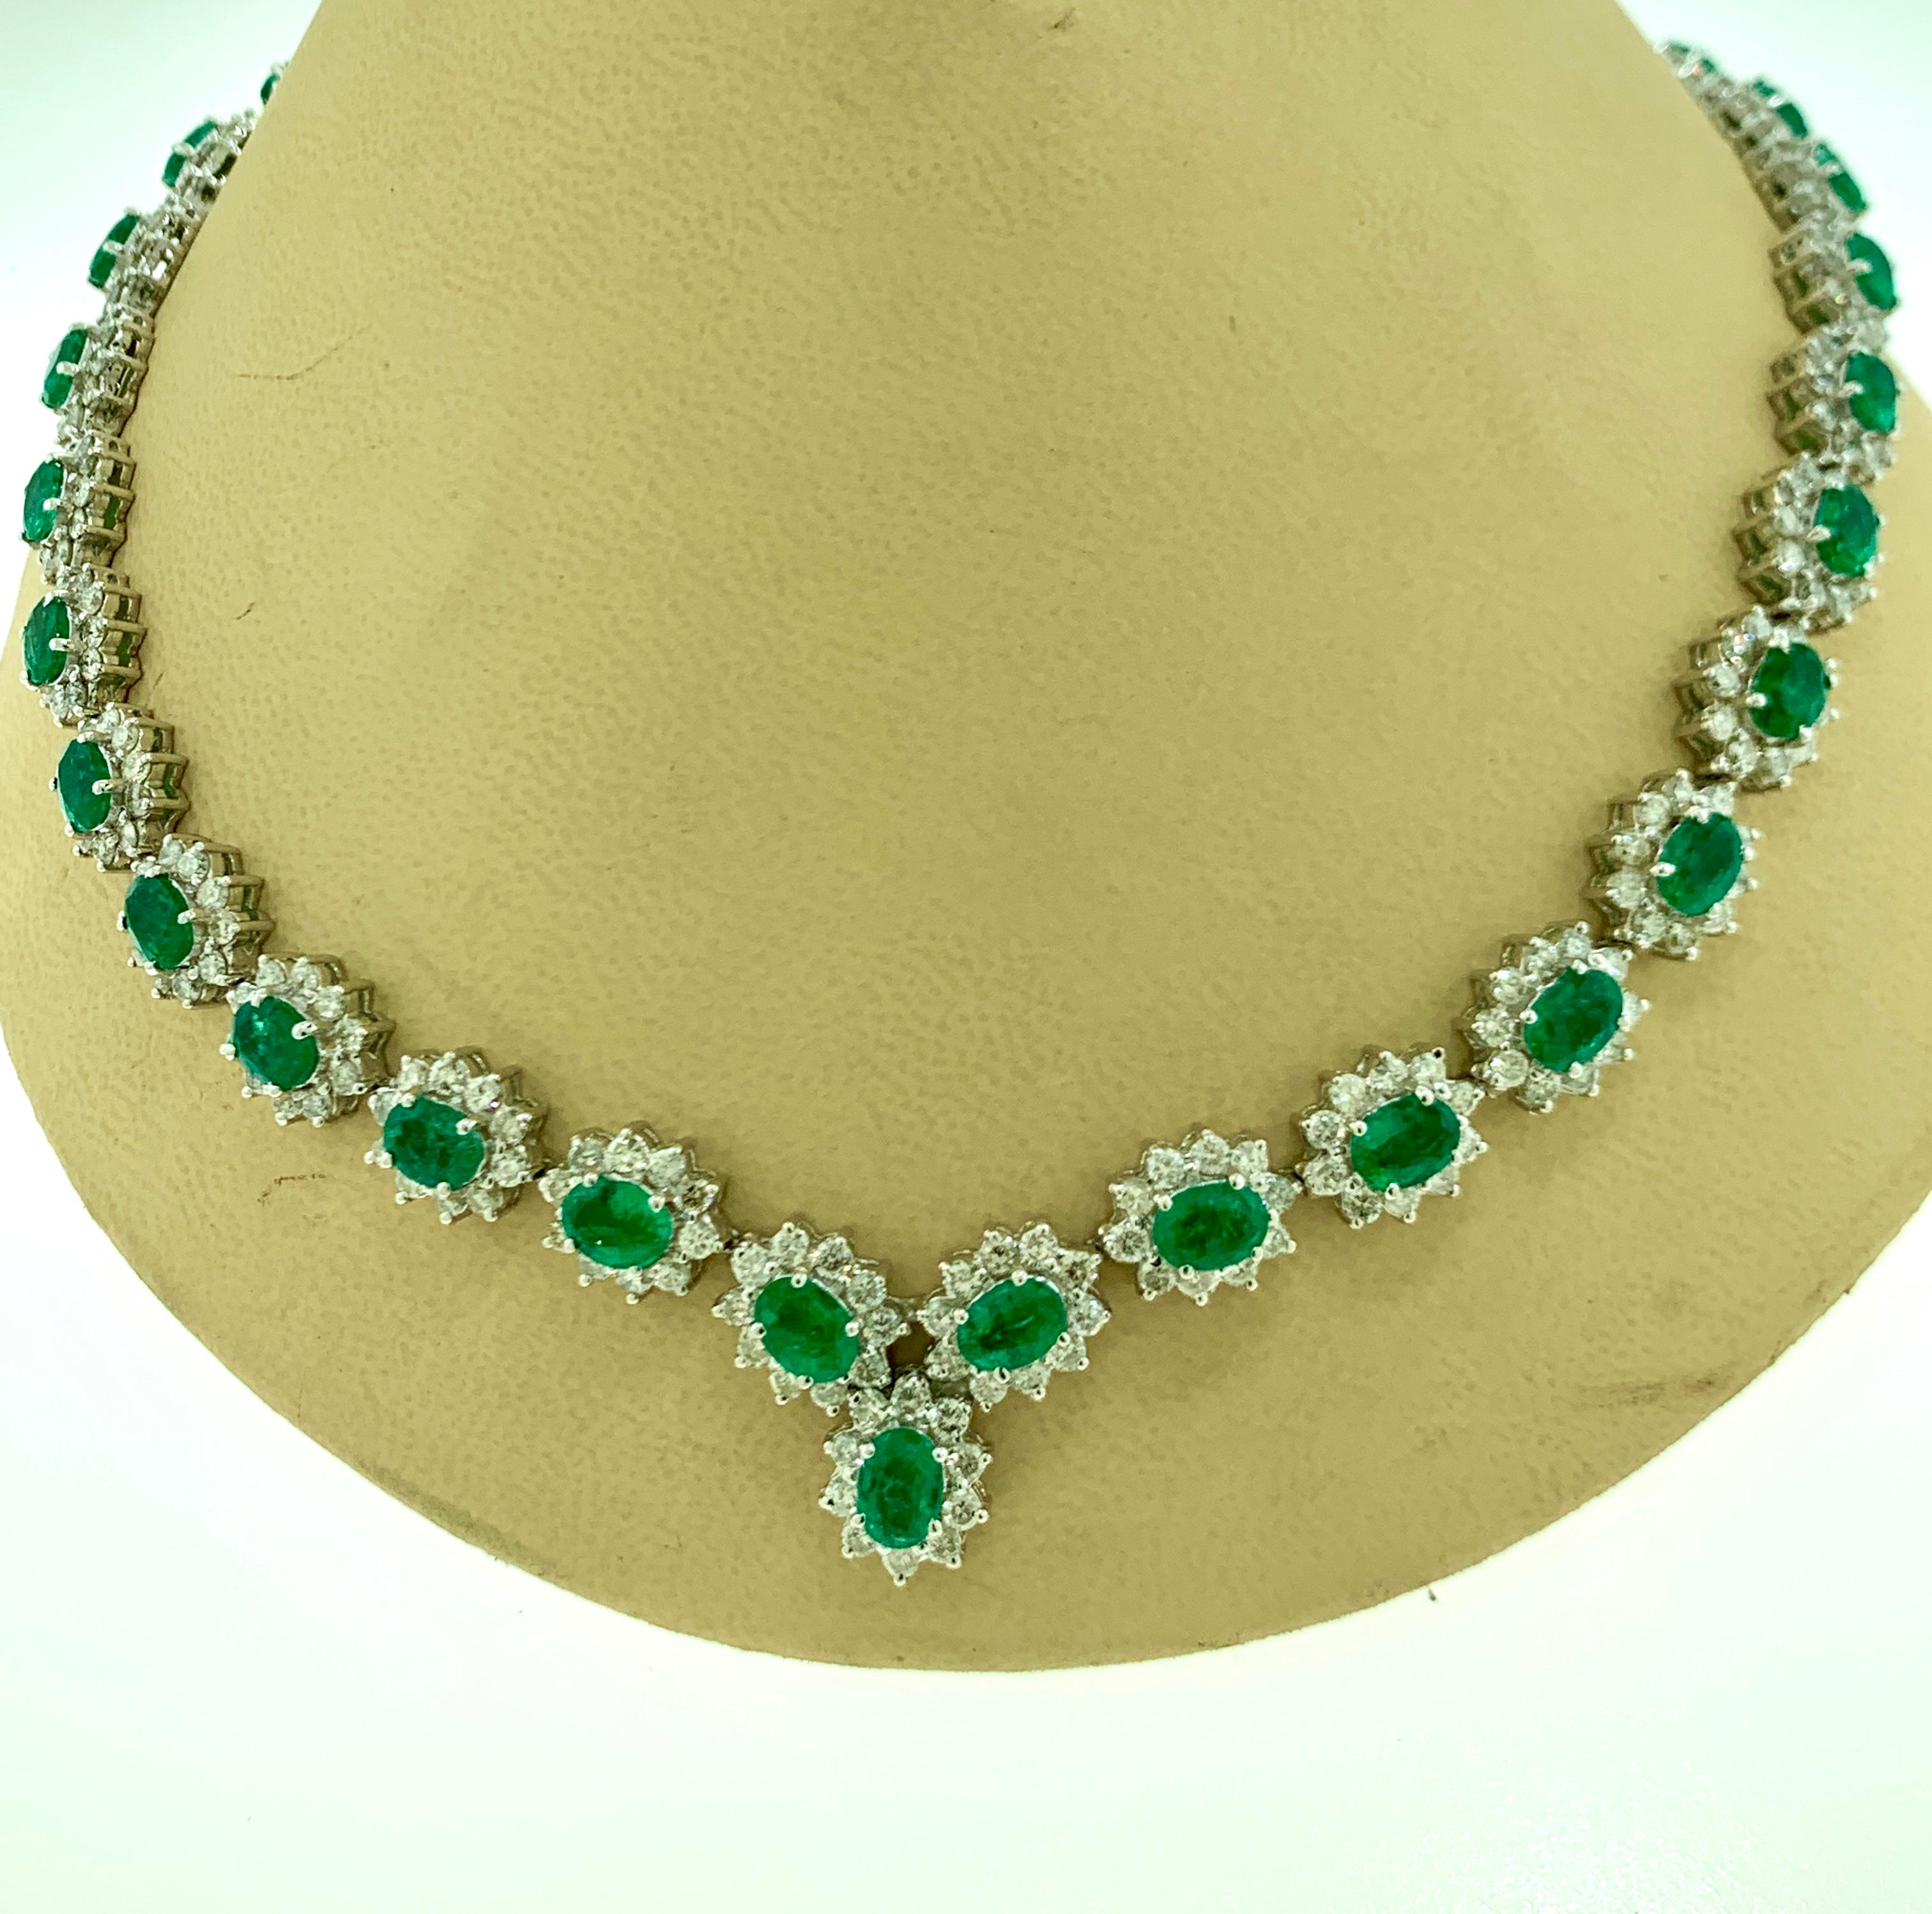 30 Carat Oval Shape Natural Emerald & 23 Carat Diamond Necklace in 18 Karat Gold In Excellent Condition For Sale In New York, NY